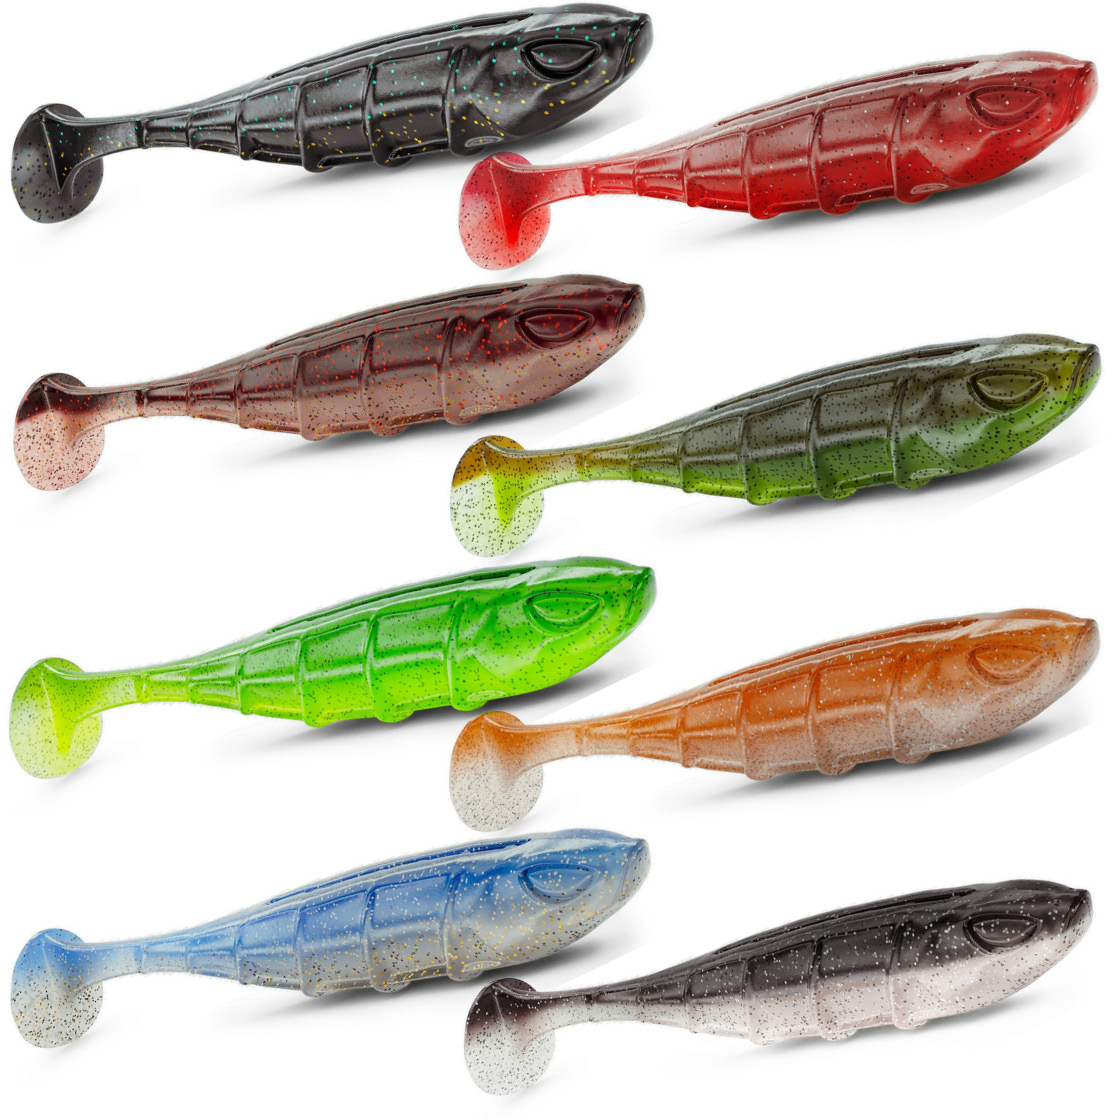 Nays VNM 65 16,5 cm, Softbaits, Lures and Baits, Spin Fishing